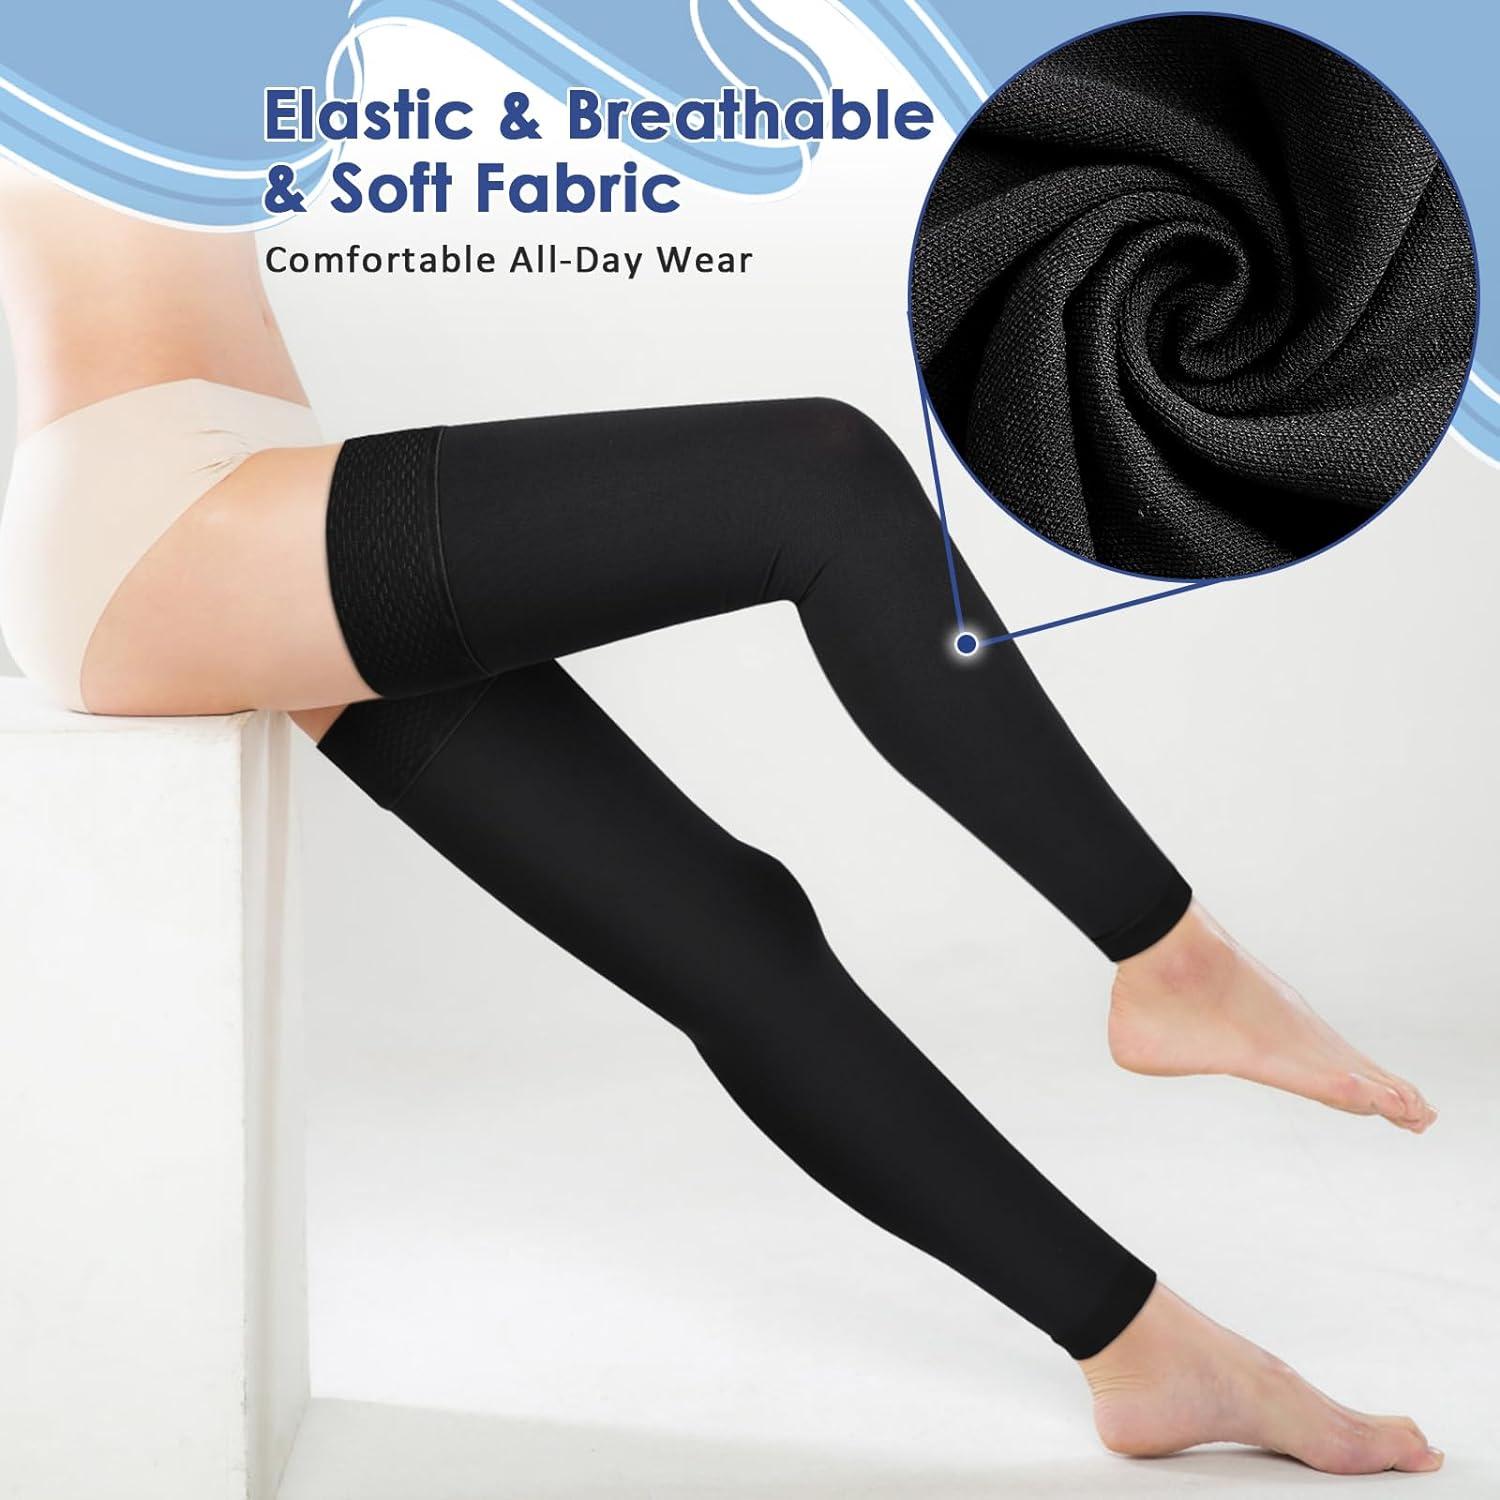 Thigh Support 15-20mmHg - Discount Surgical  Compression garment,  Compression wear, Thighs